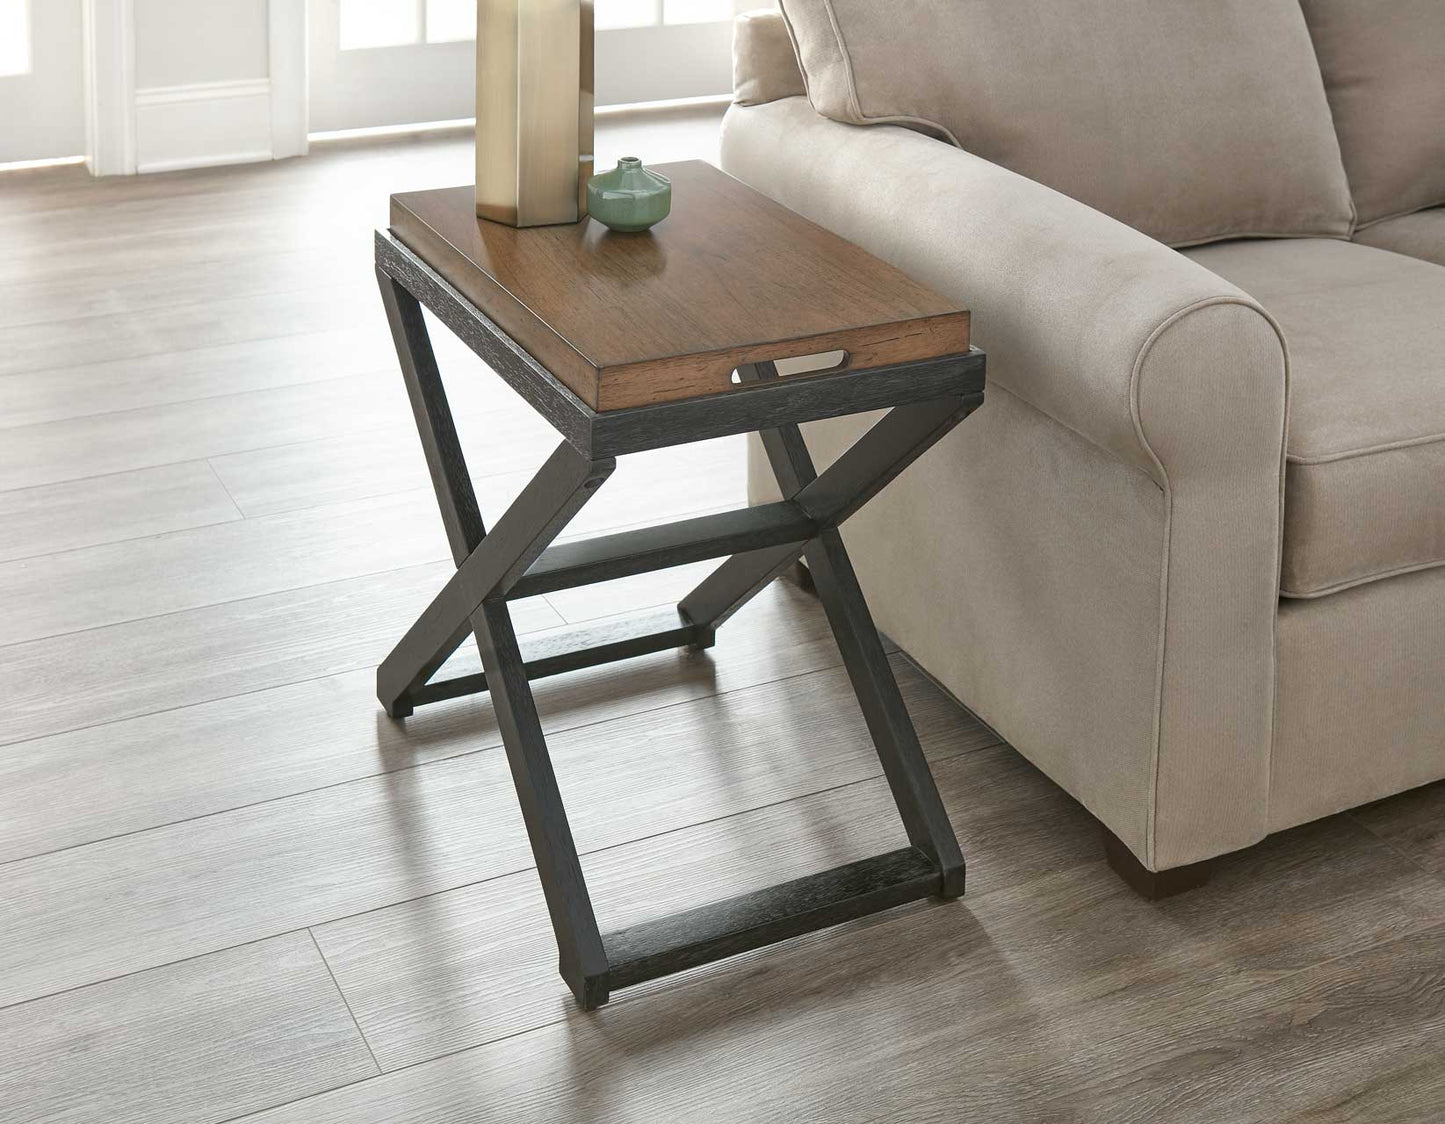 Topeka Chairside End Table